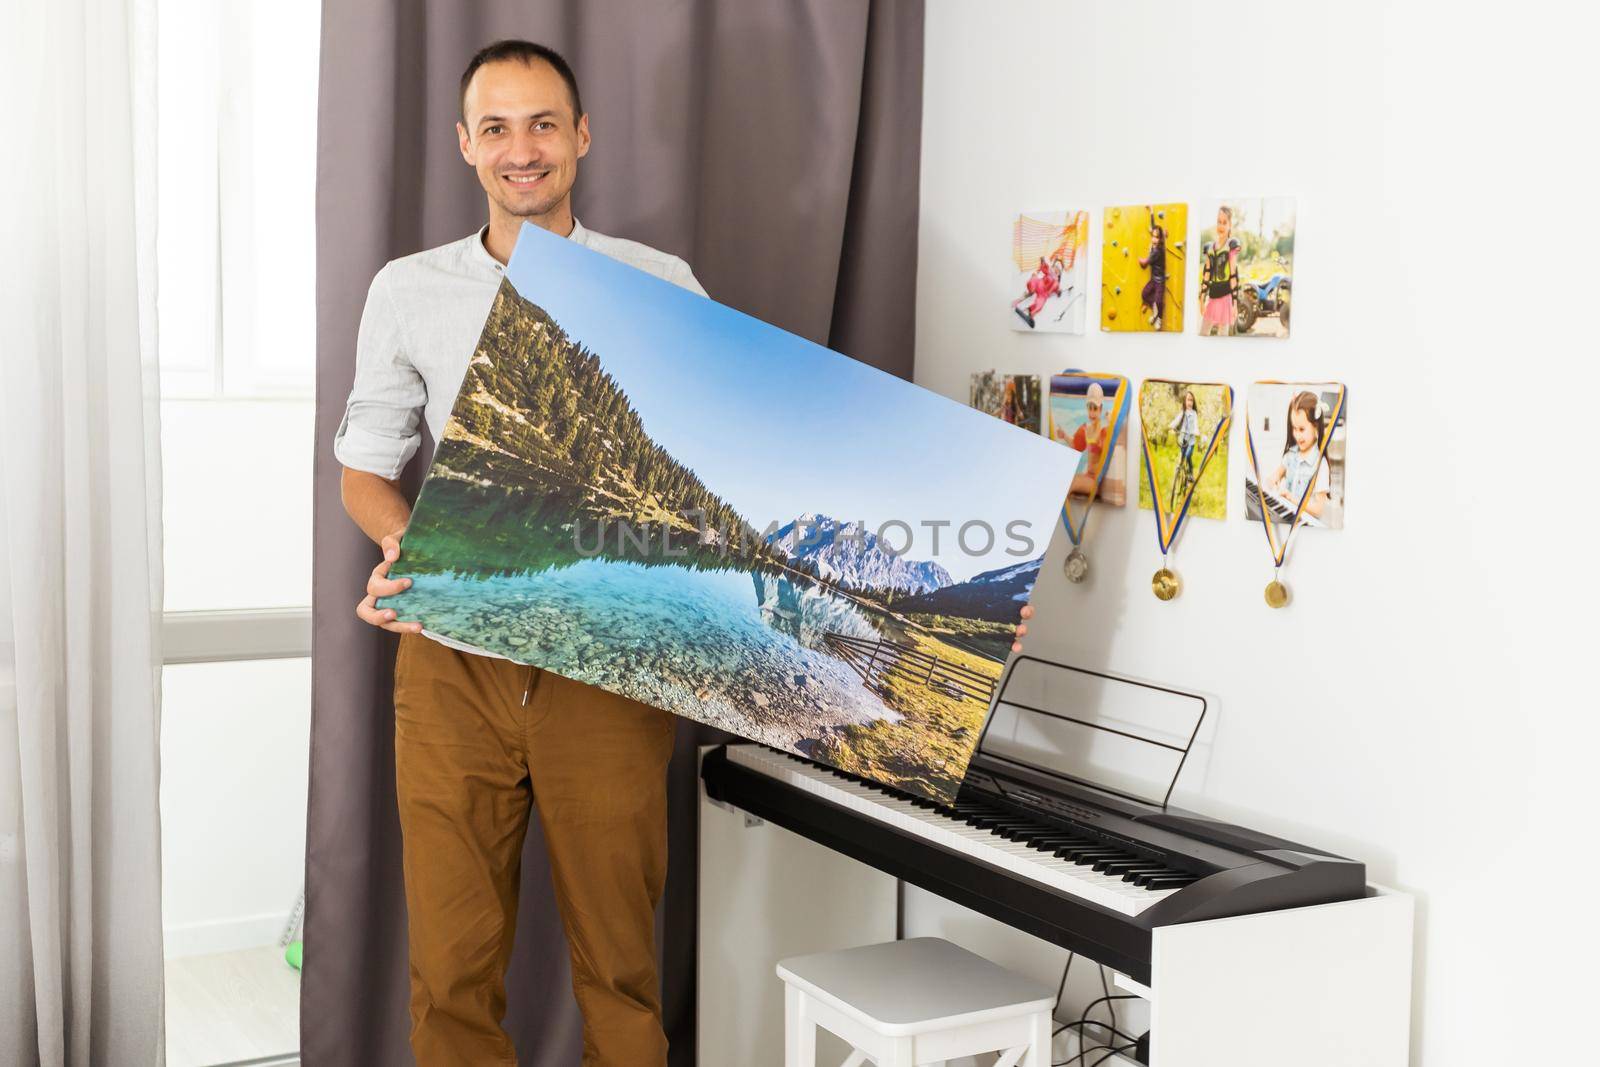 Modern Home Interior And Domestic Decor. a man is holding a photo canvas.